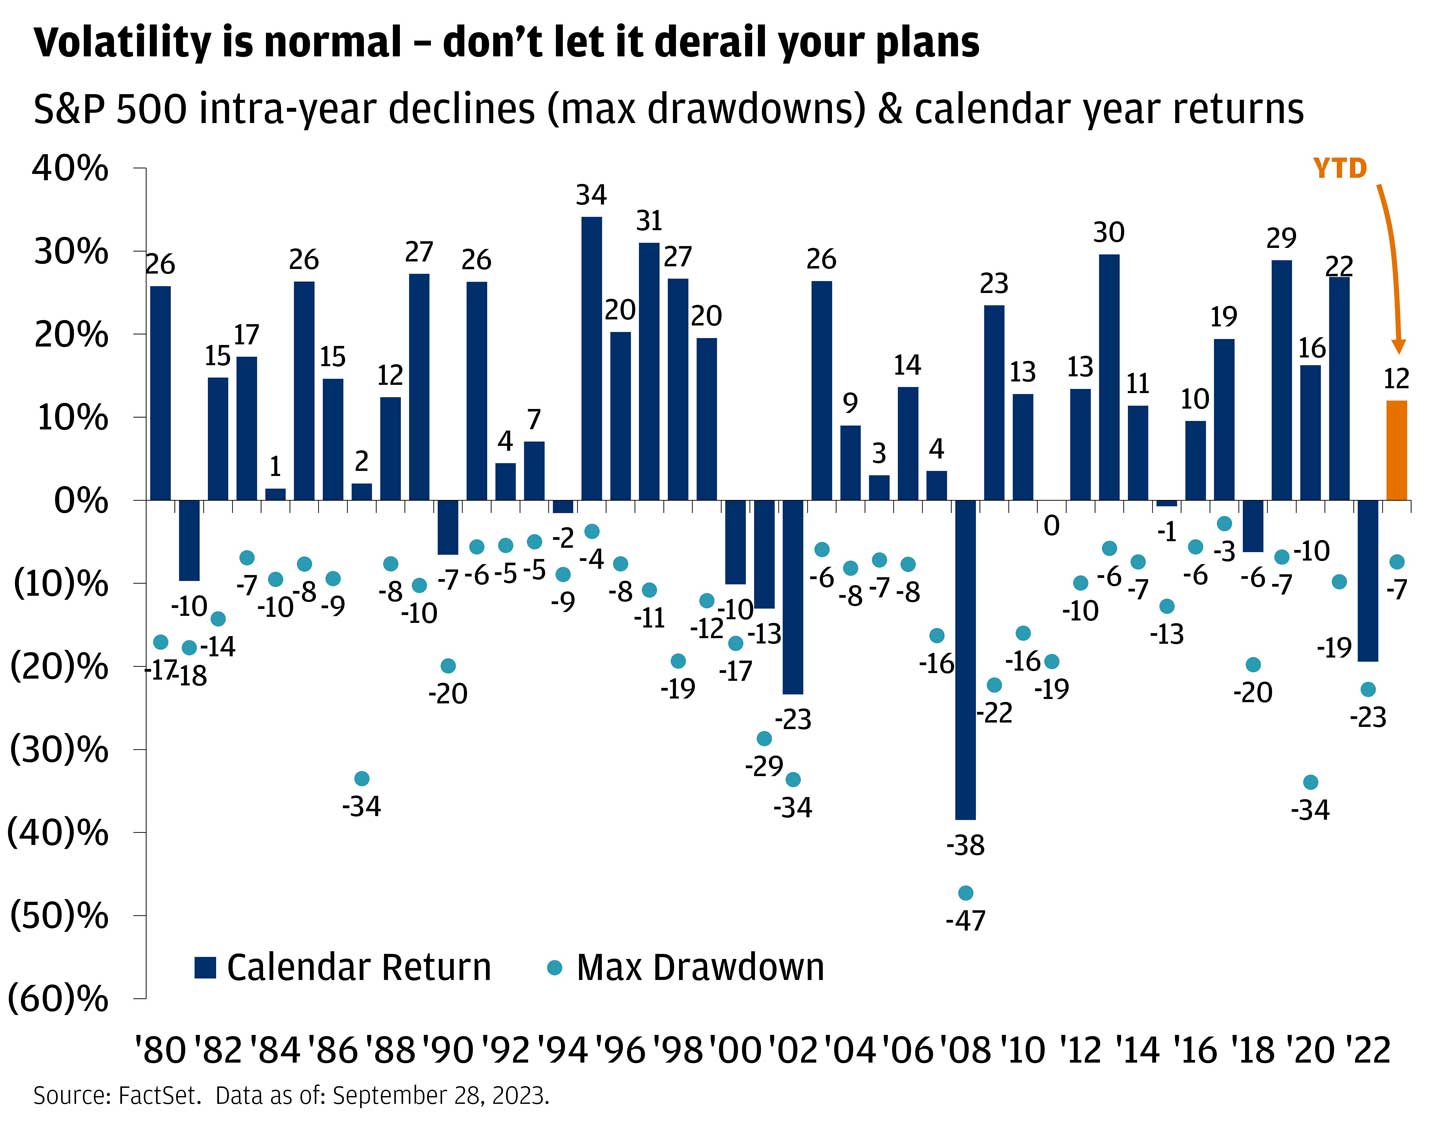 This bar graph shows how stocks tend to reward long-term investors by showing S&P 500 intra-year declines (max drawdowns) & calendar year returns.